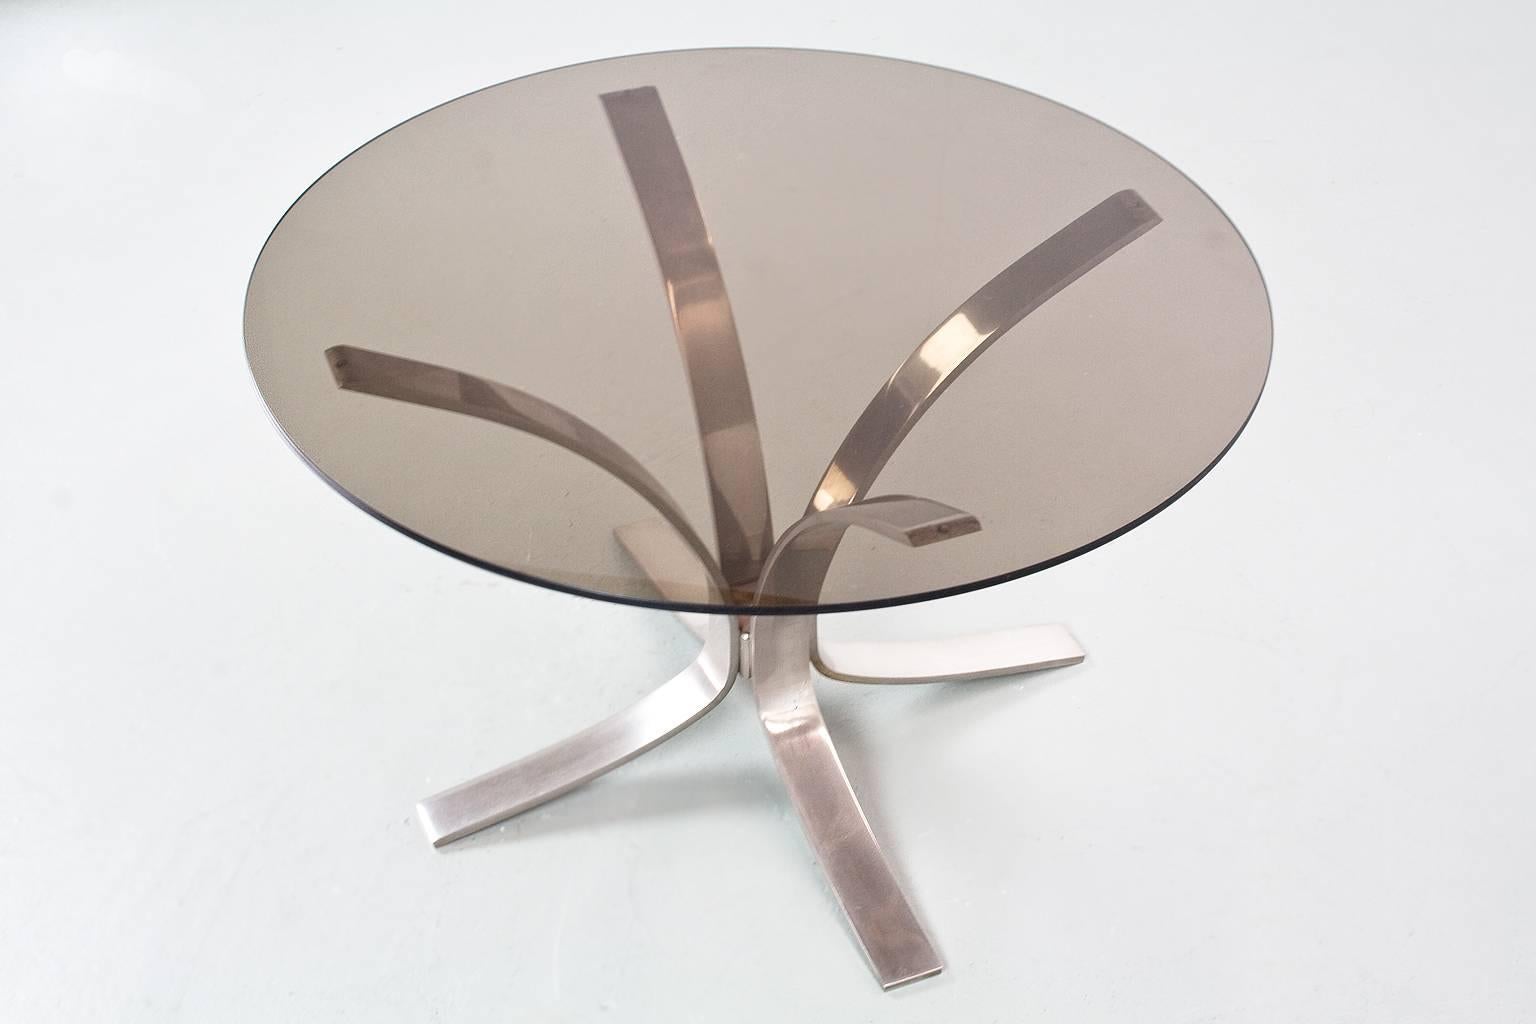 Metal and glass cocktail or coffee table in style of the American designer Roger Sprunger, 1960 Dunbar Furniture. The coffee table has a metal plated base and a round smoked glass top in very good condition with minor signs of age and use.

 